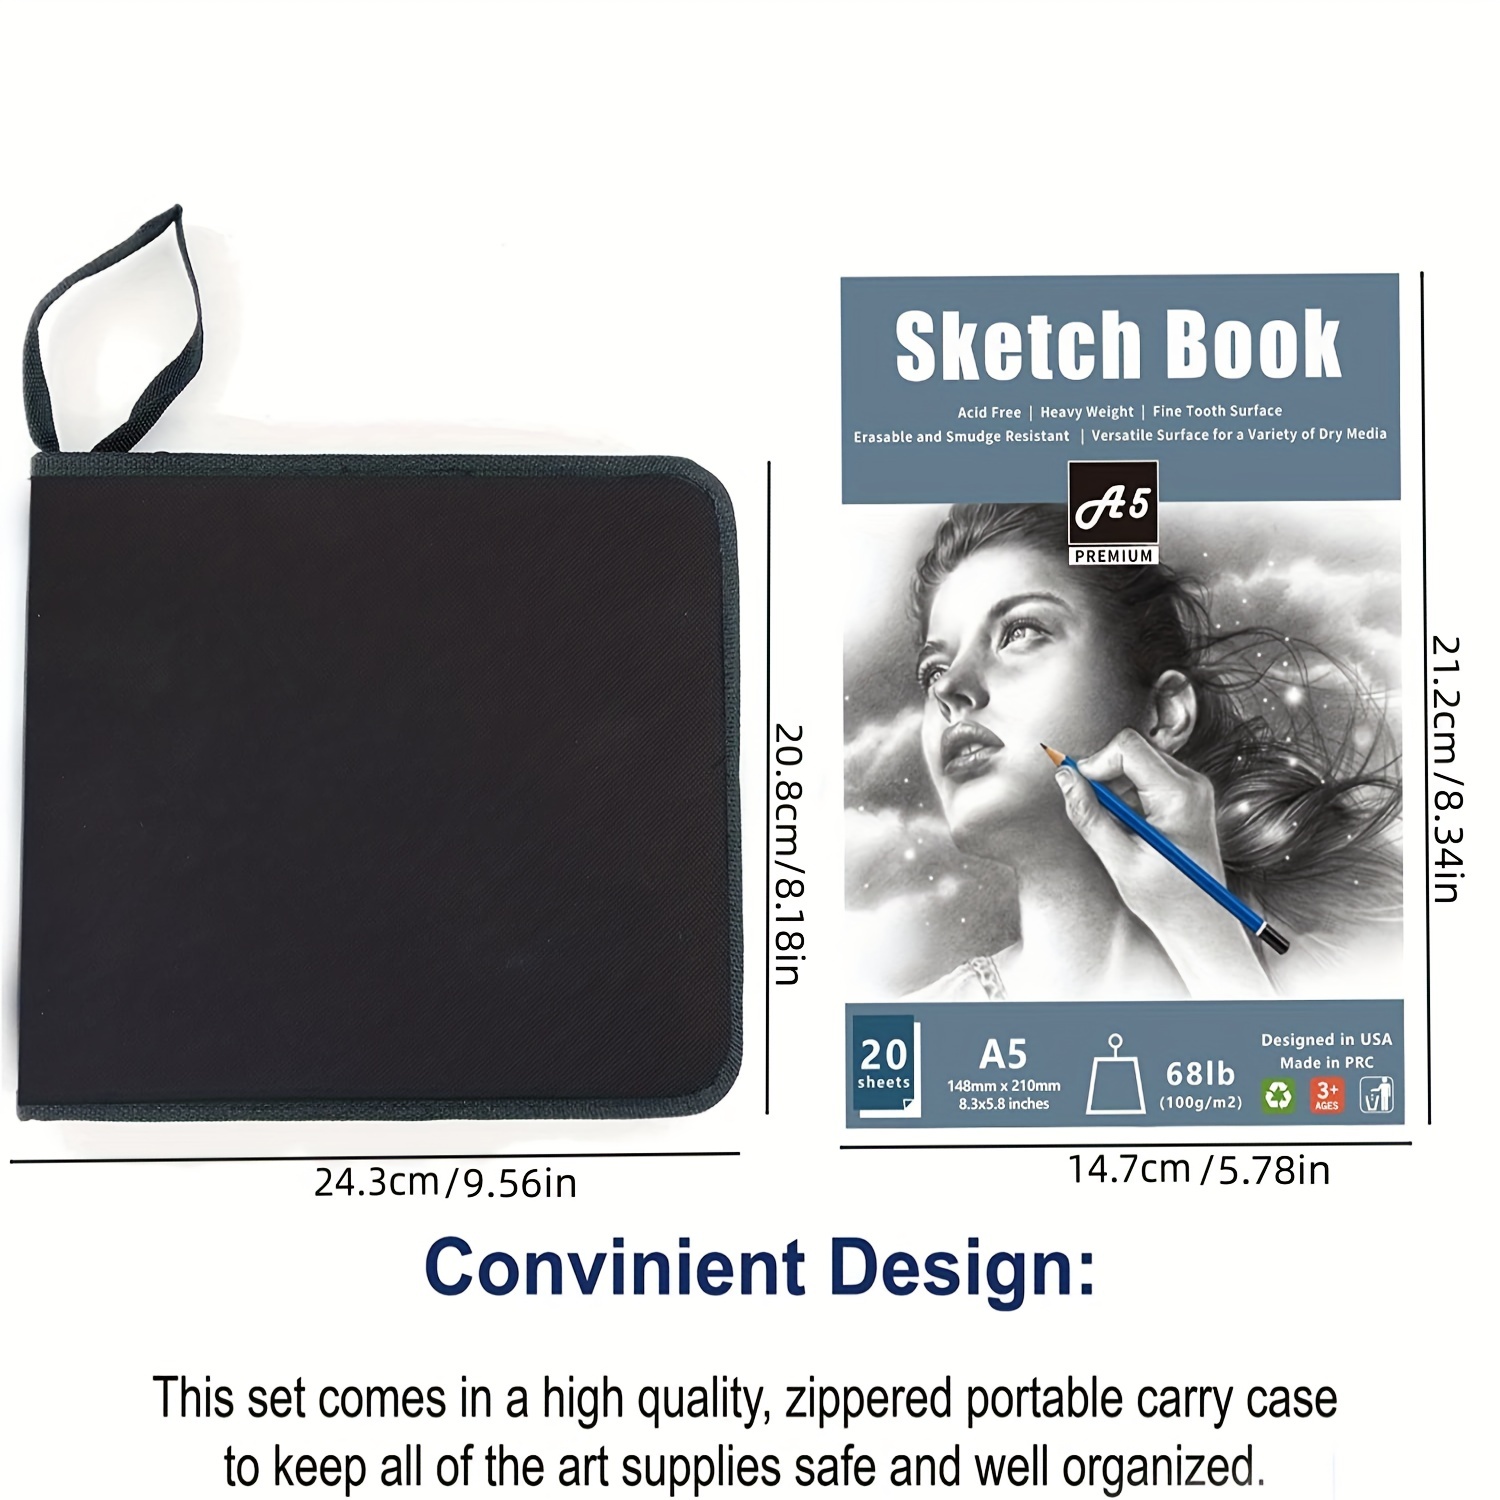 EGOSONG 41 Drawing Set Sketch Kit Sketching Supplies with Sketchbook  Graphite and Charcoal Pencils Pro Art Drawing Kit for Adults Teens Beginners  Kids ideal for Sketching Shading